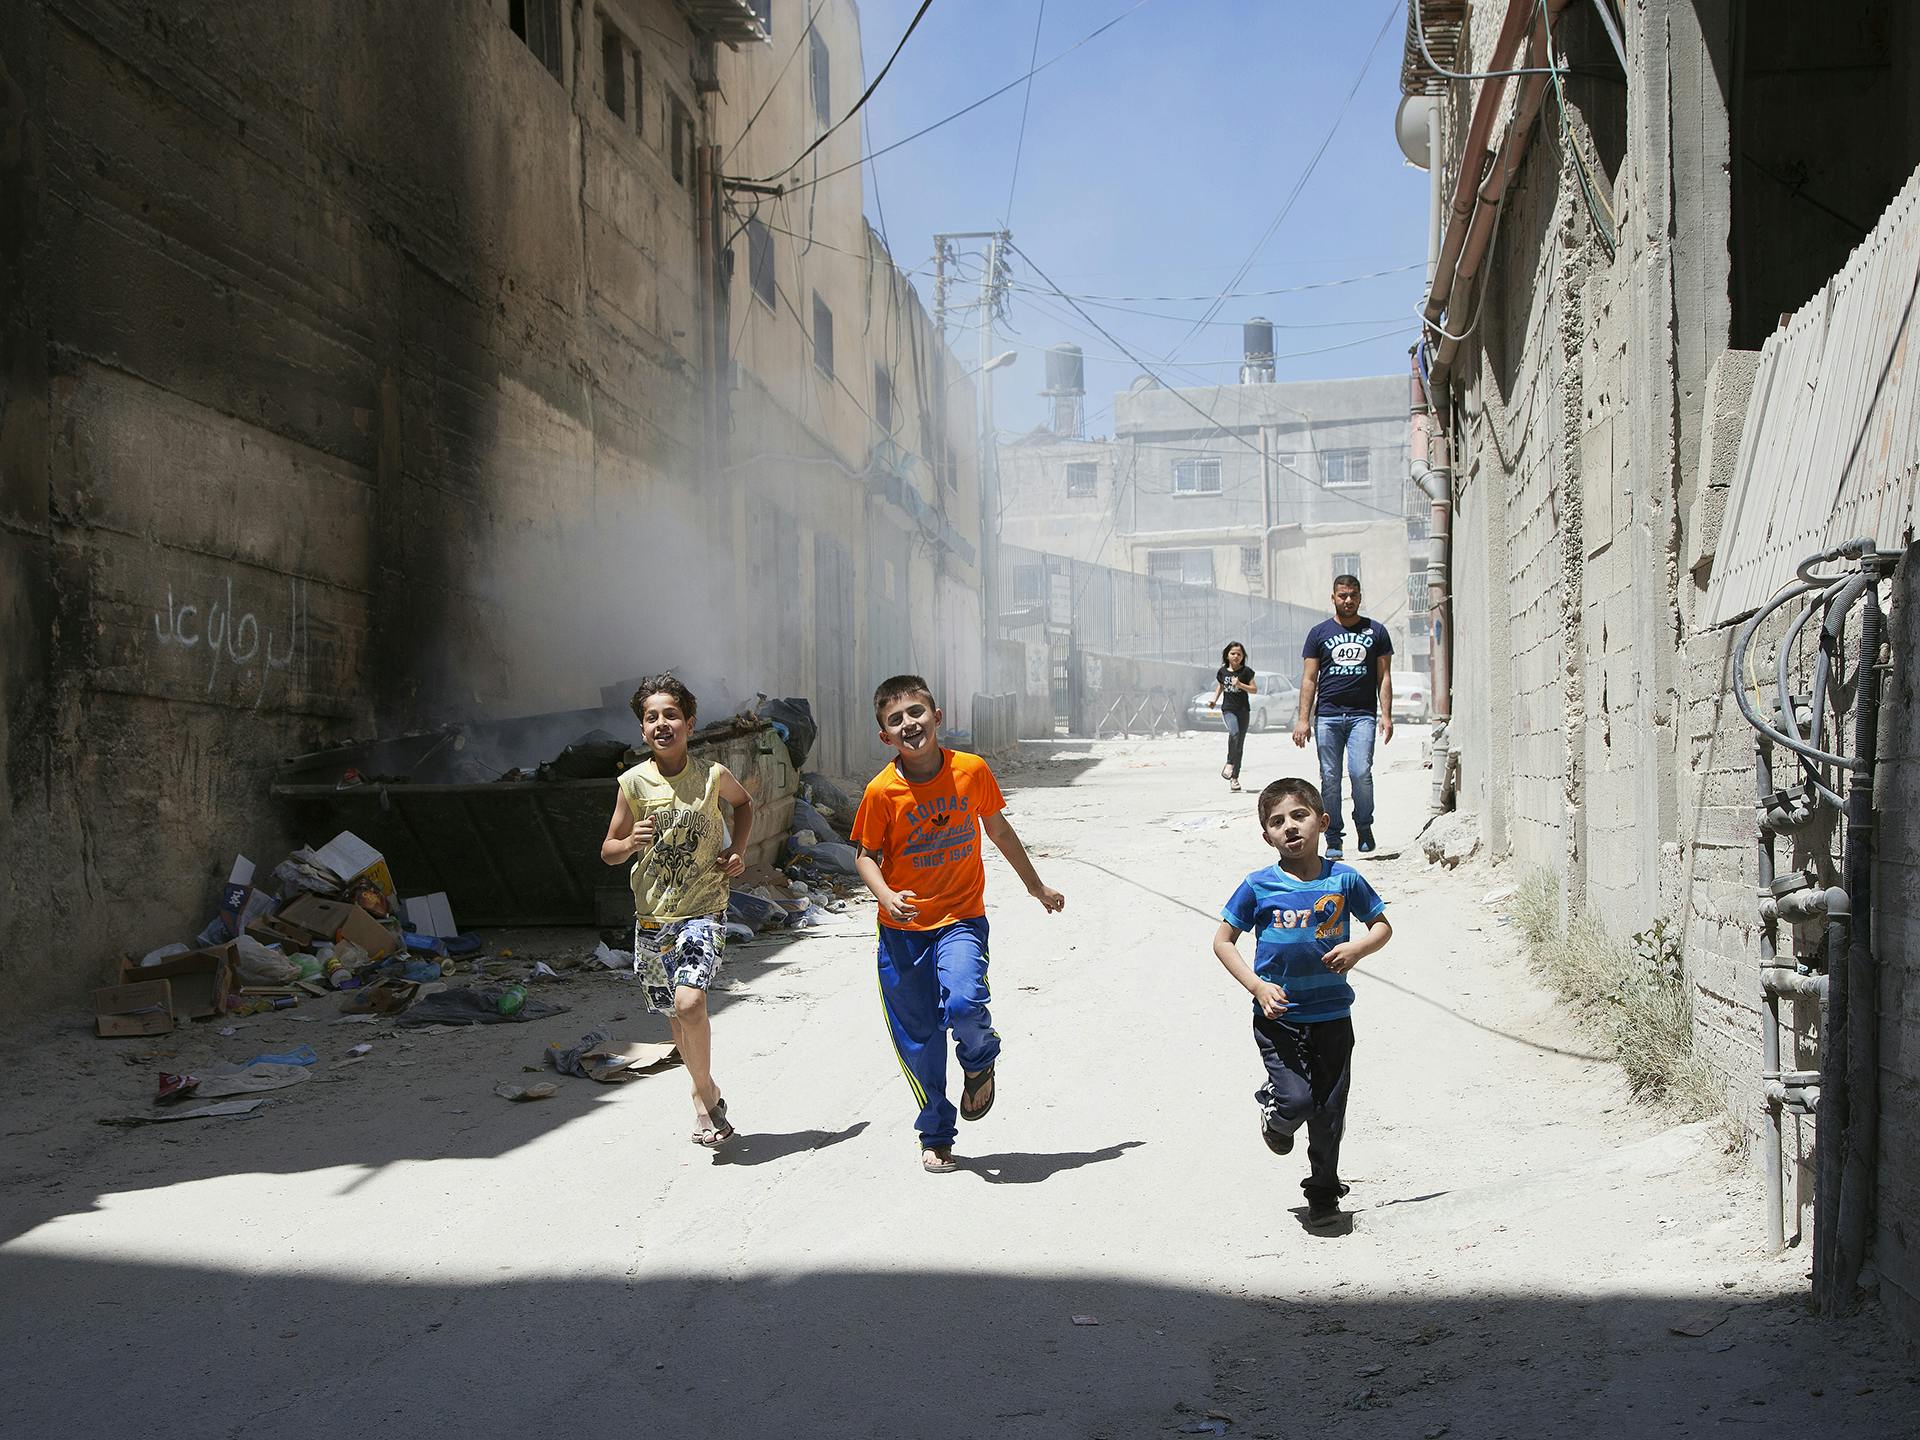 Children running in the streets of a refugee camp